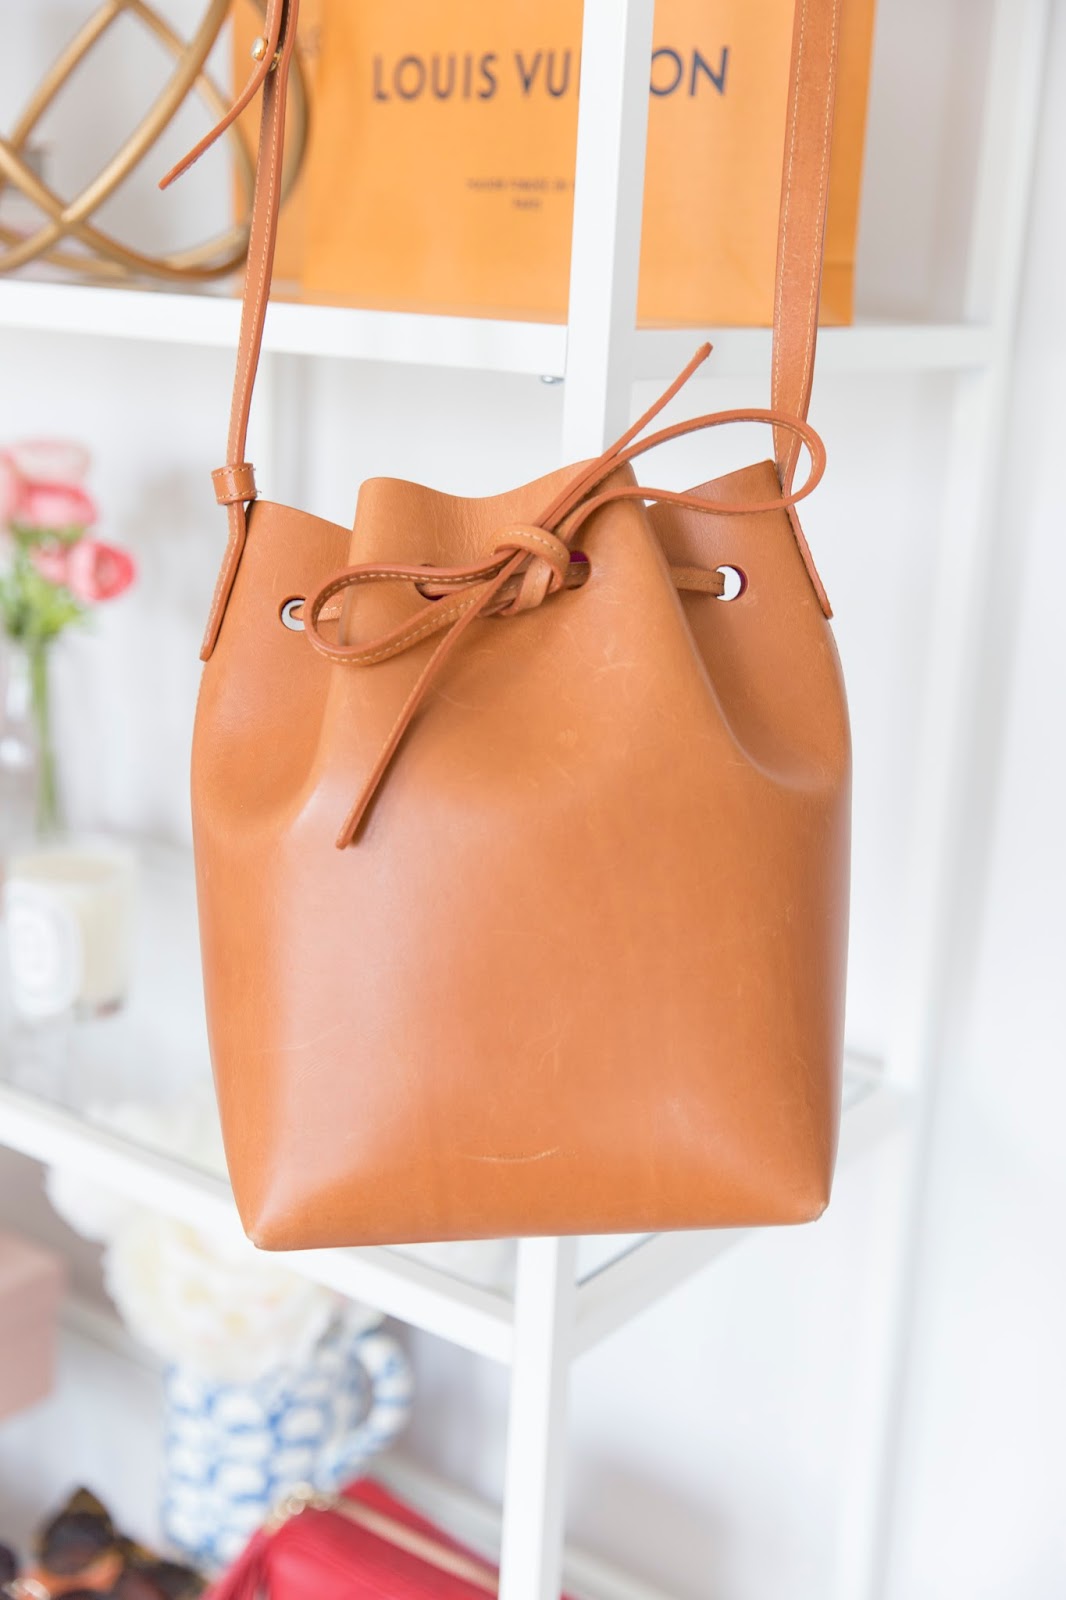 Review: Mansur Gavriel Large Tote (Pros, Cons, Wear & Tear and